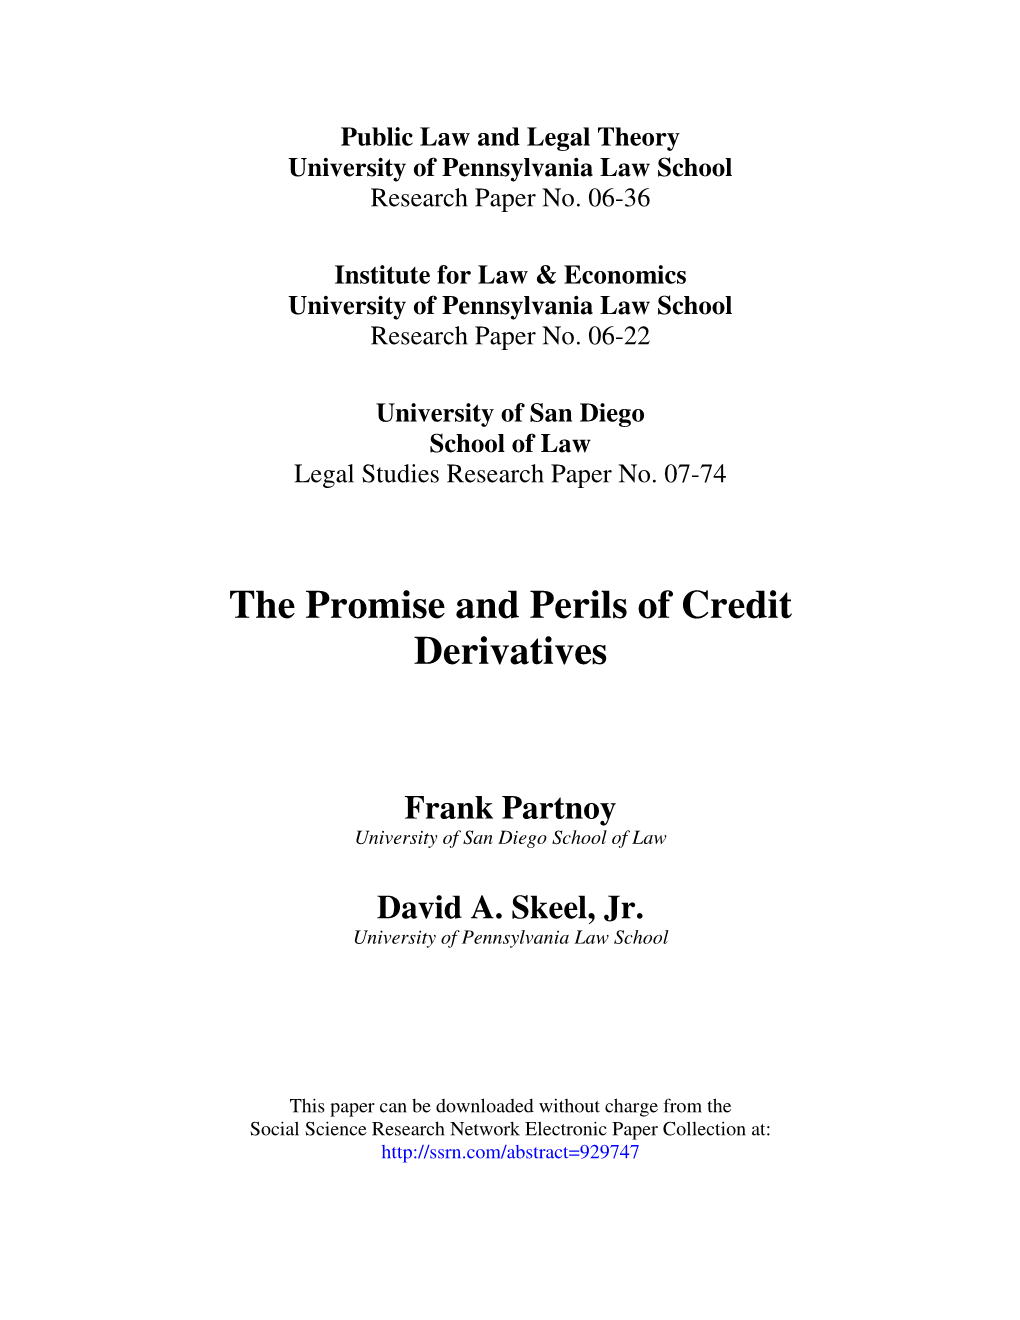 The Promise and Perils of Credit Derivatives